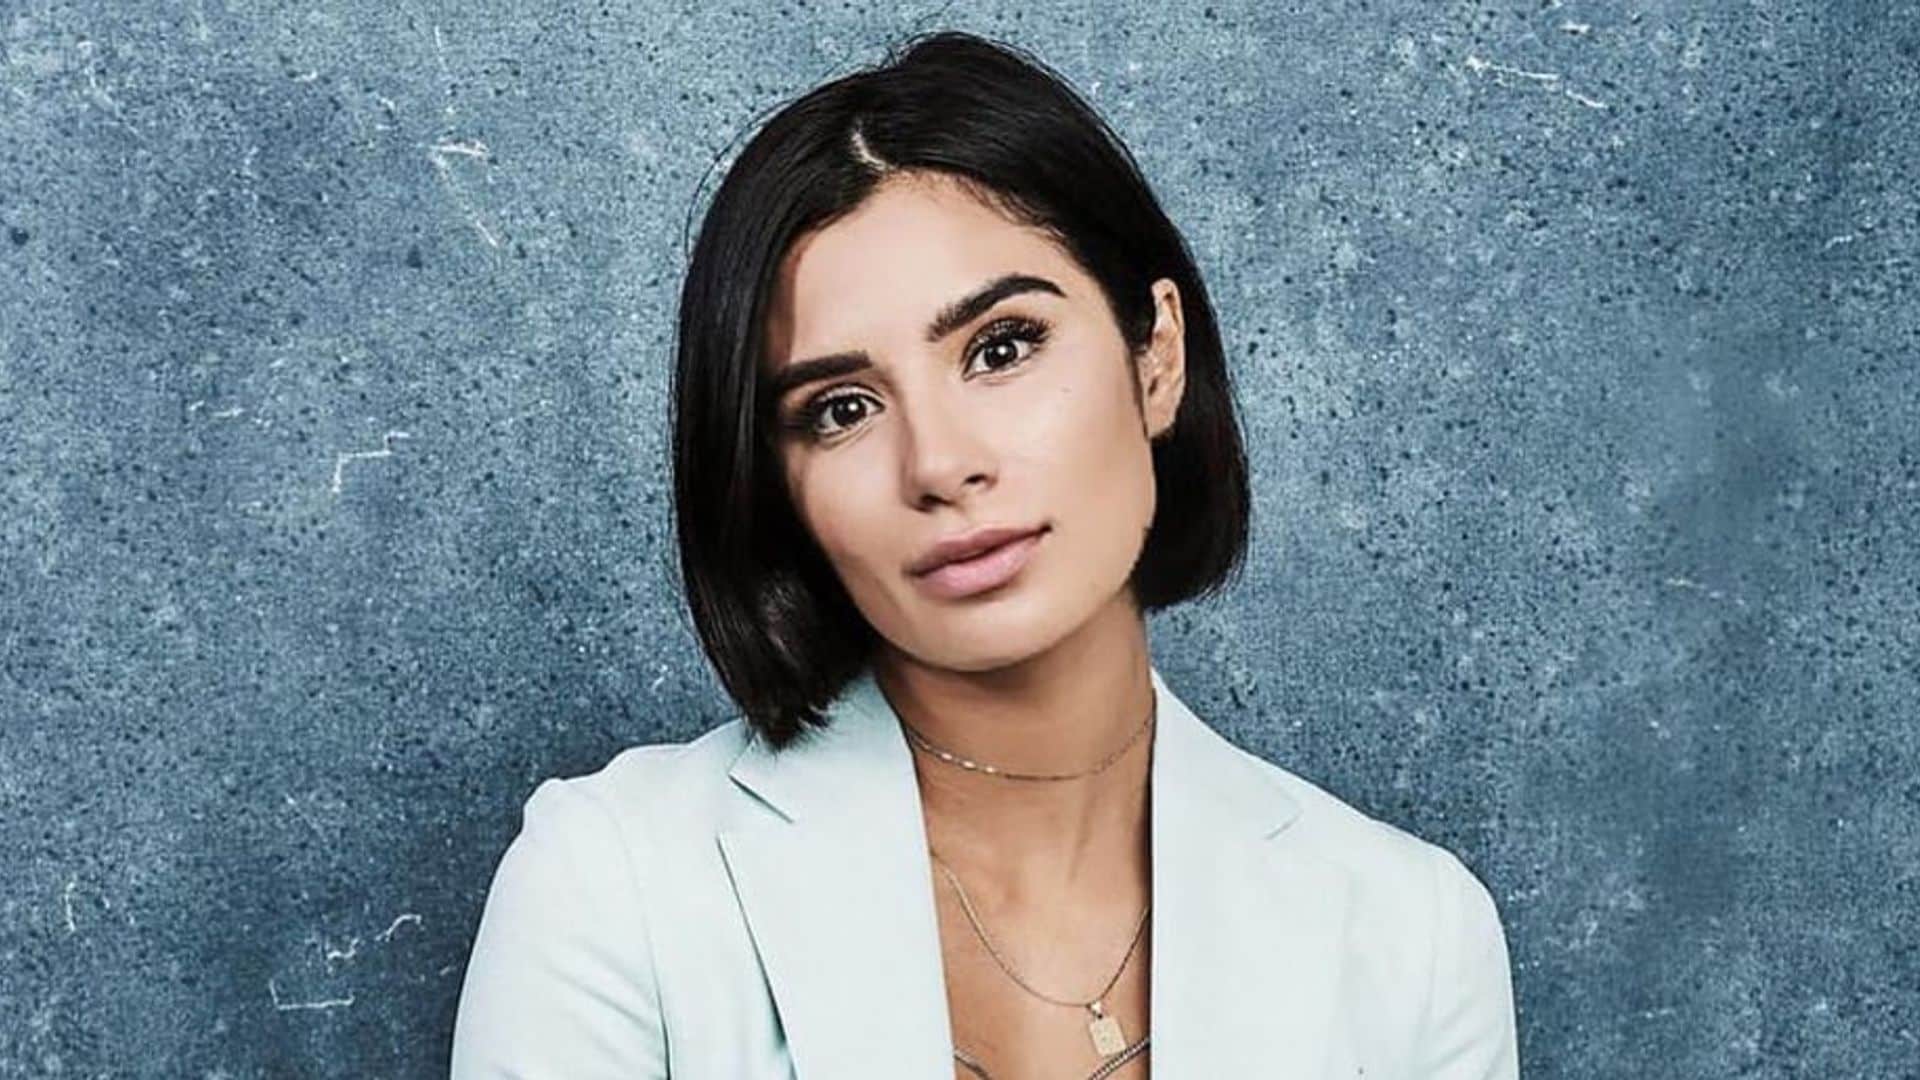 How Diane Guerrero wants to affect change through her work